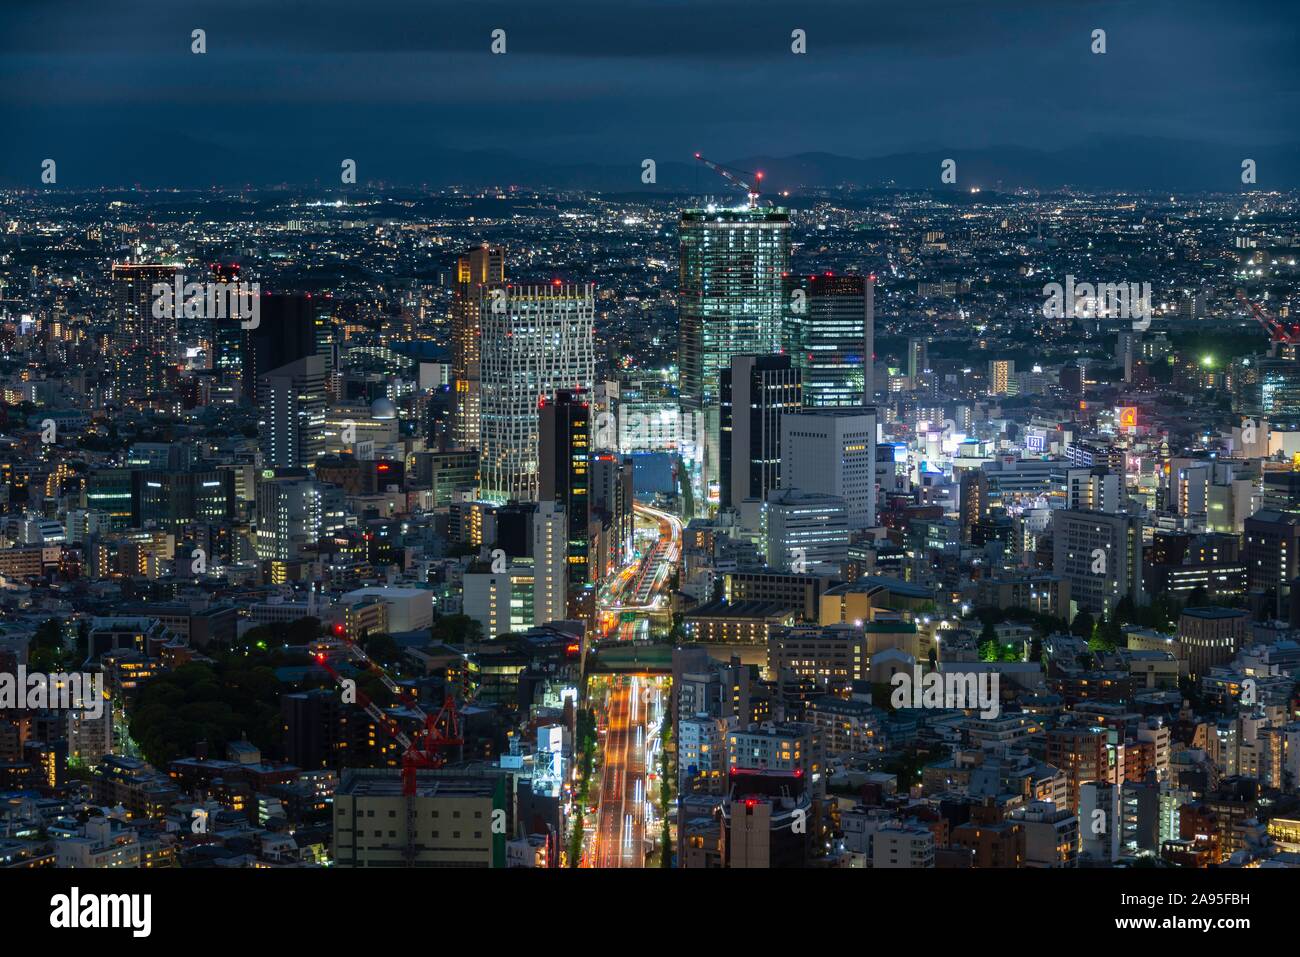 View from Roppongi Hills to sea of houses, city view at night, skyscrapers, Tokyo, Japan Stock Photo